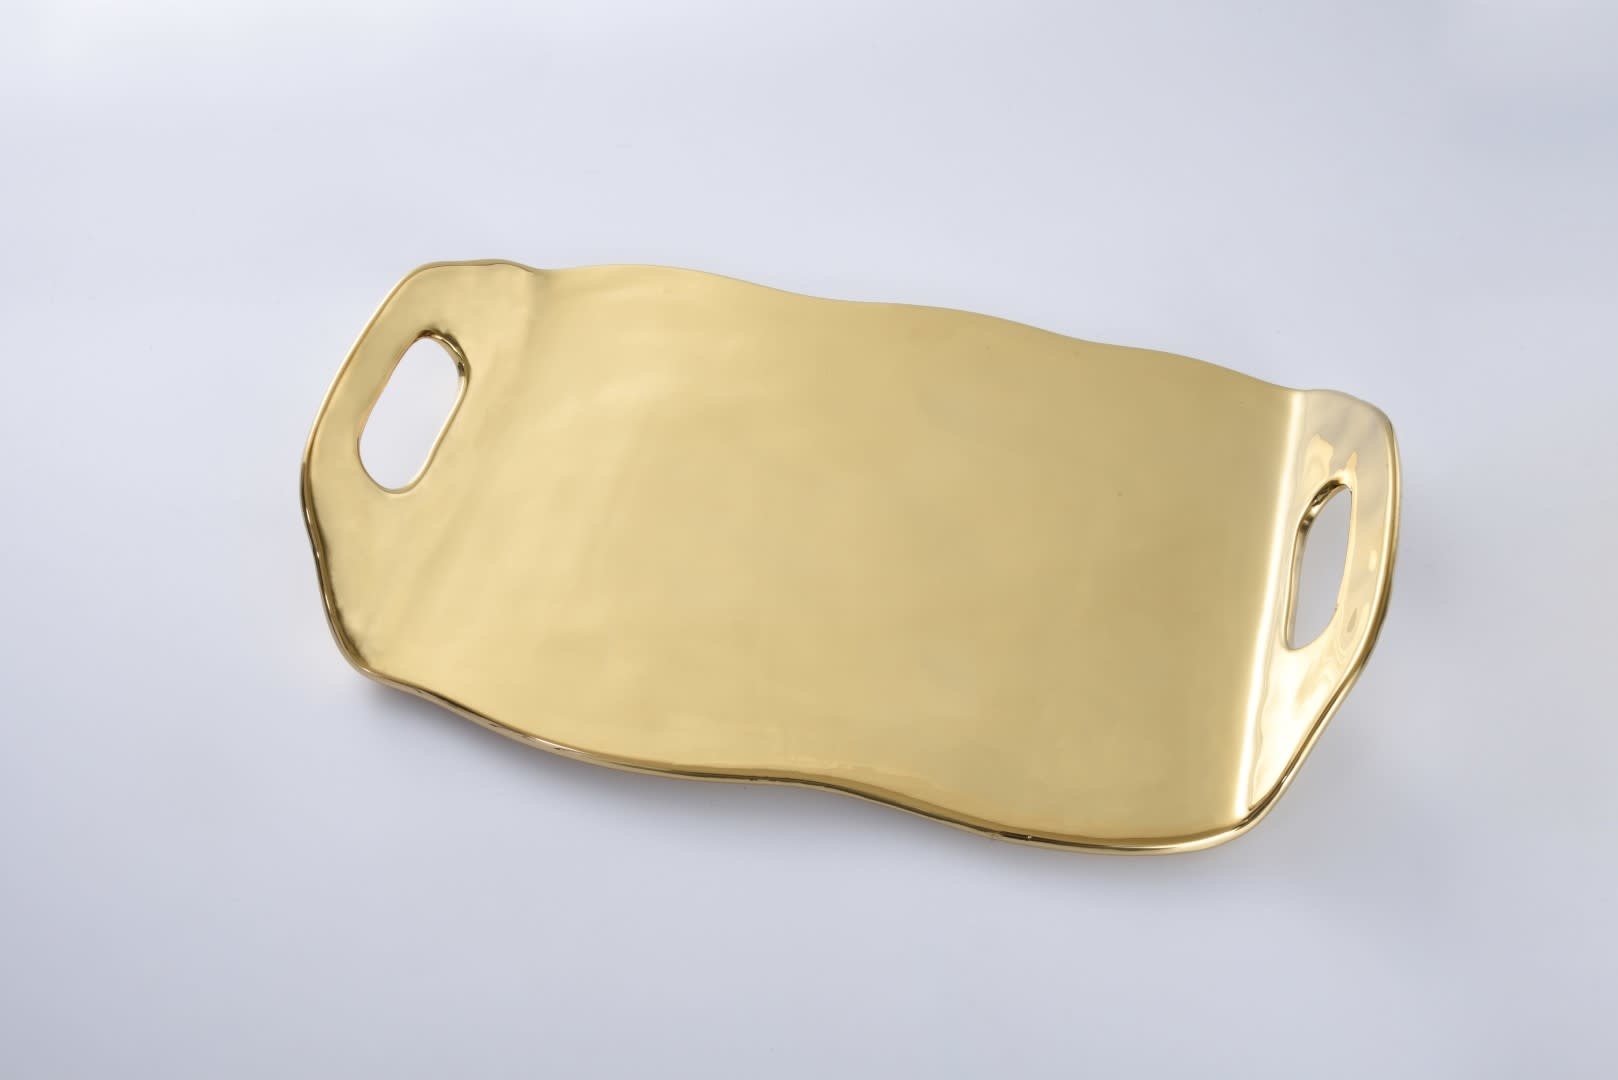 Simple Ceramic Gold Tray With Handles